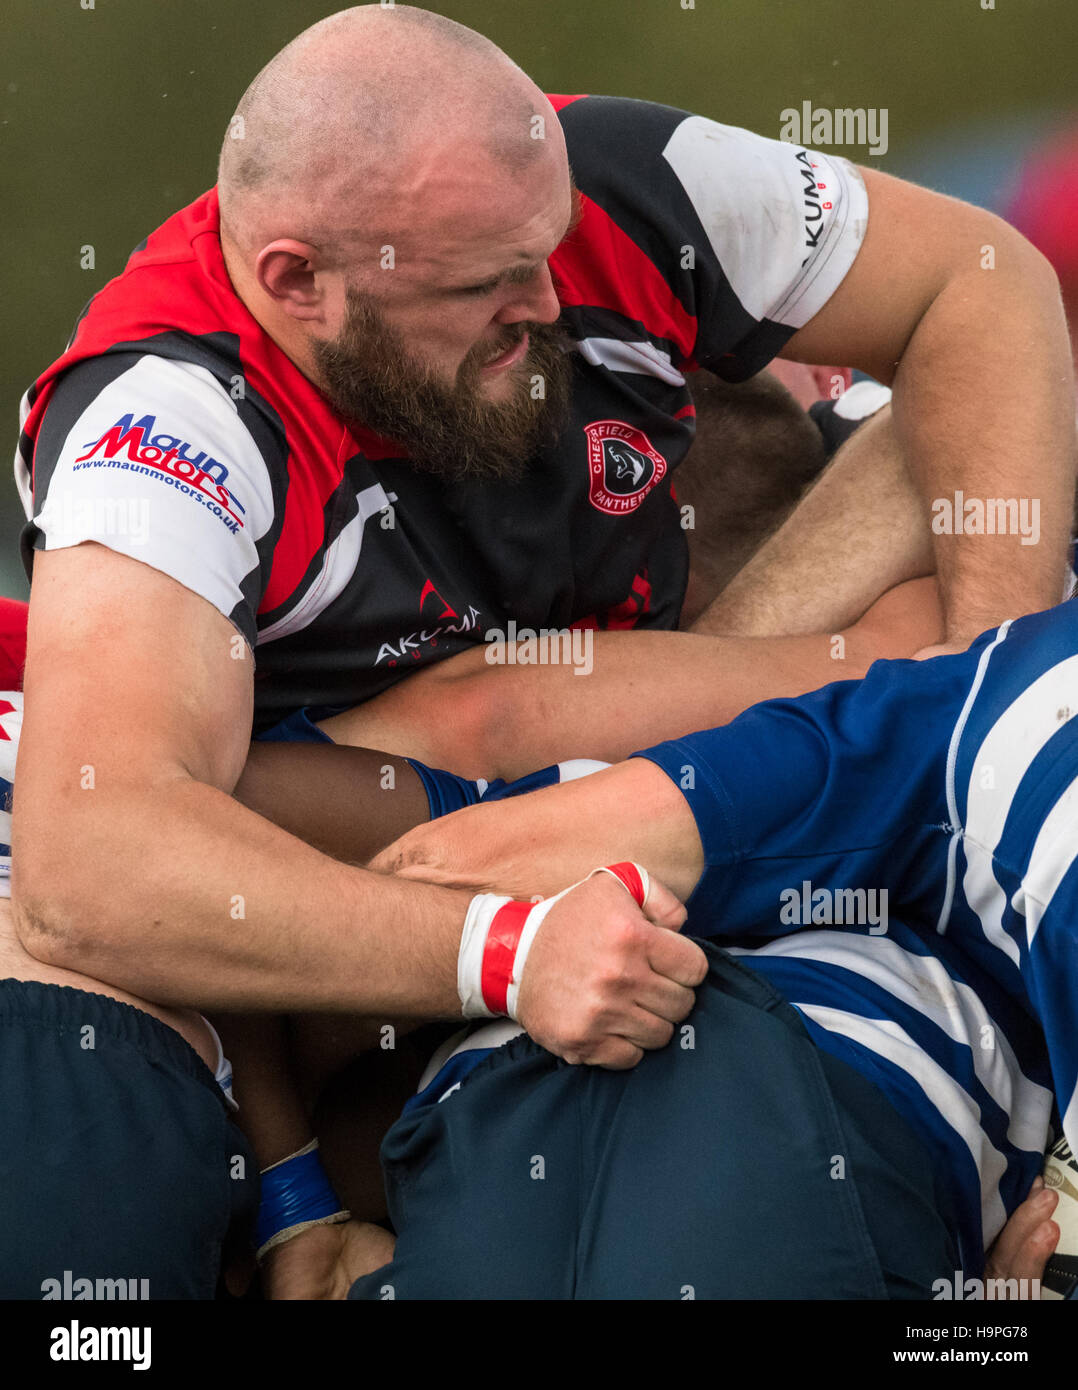 Rugby players playing rugby union. Stock Photo